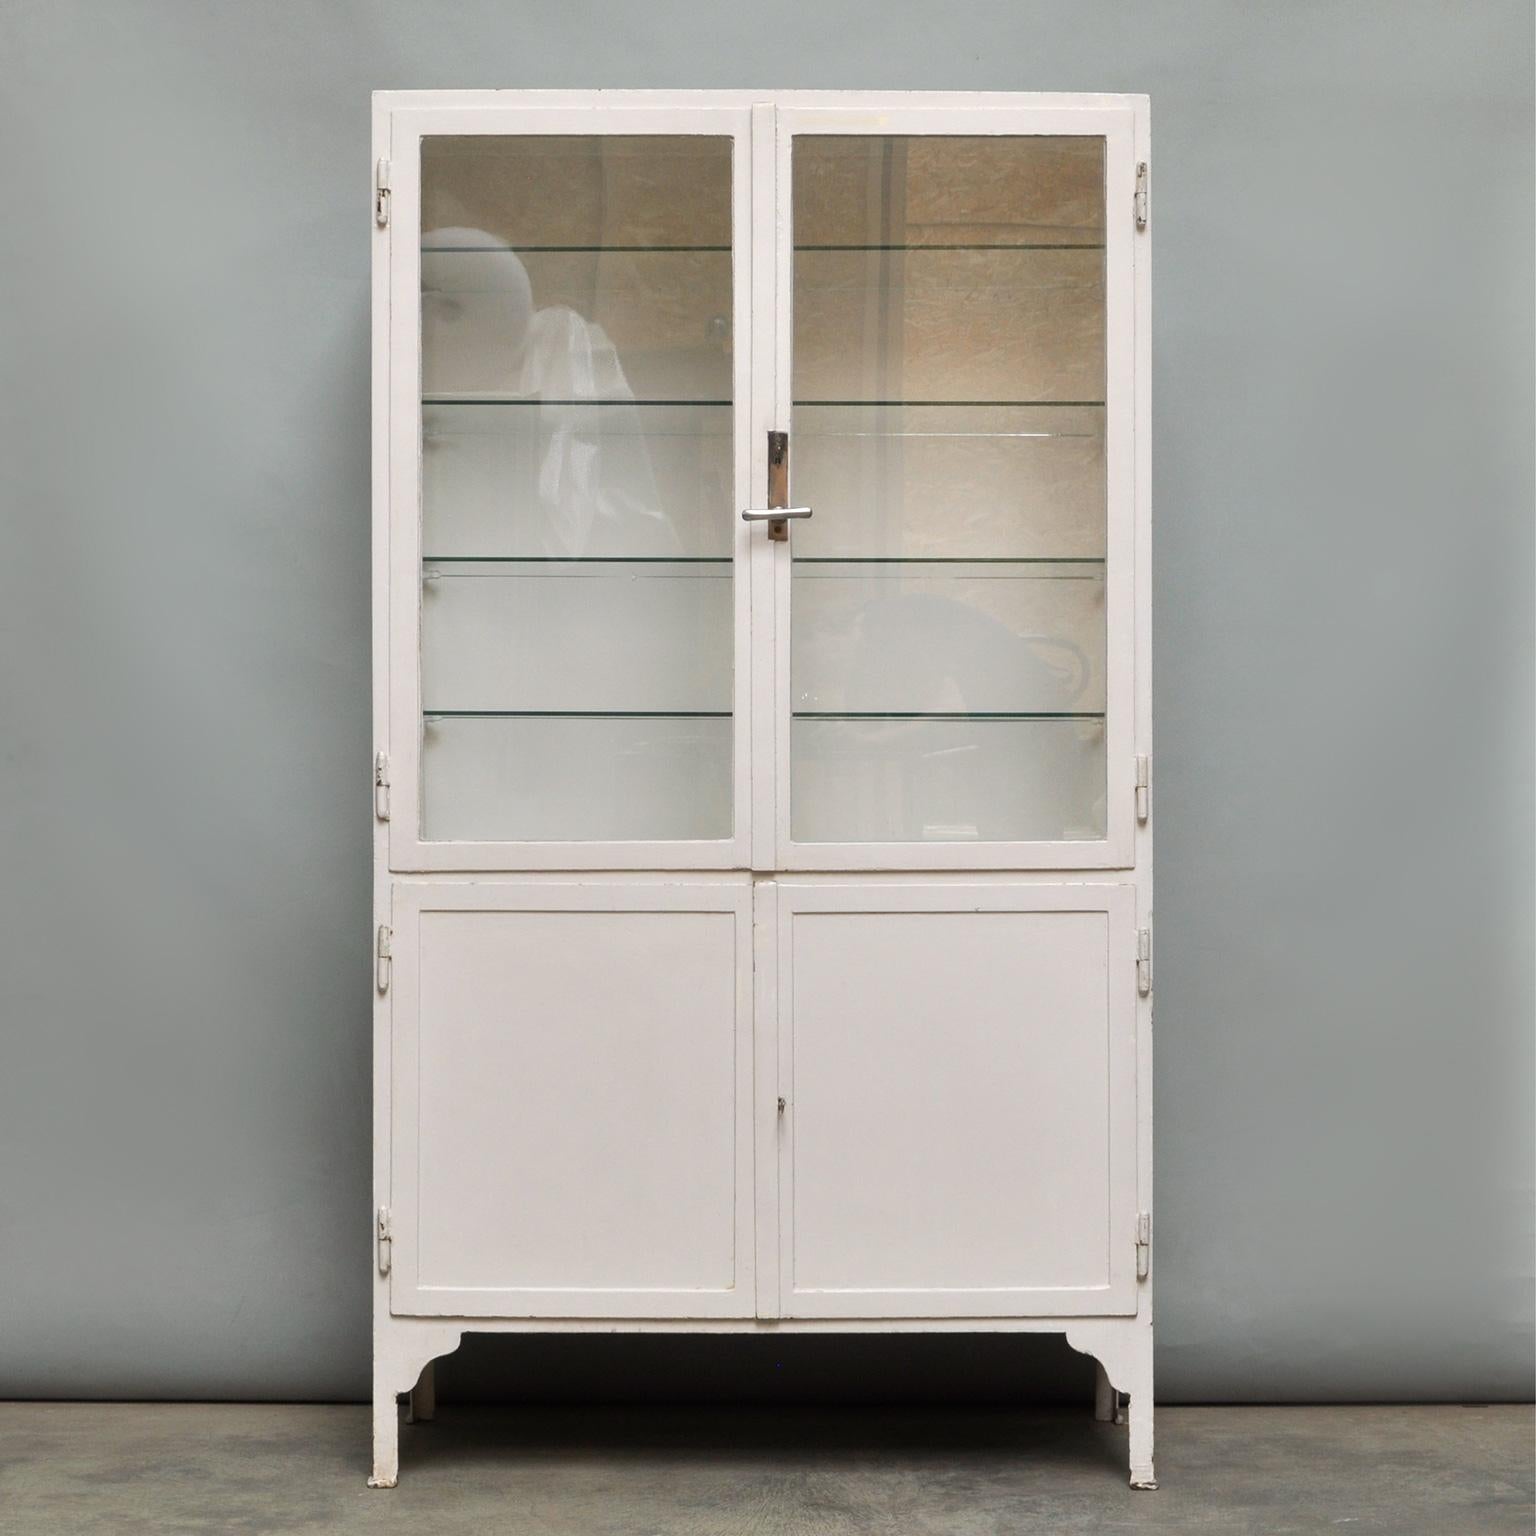 This former medical cabinet was produced in the 1940s in Hungary. It is made of thick iron and antique glass. In the upper part, there are four glass shelves. The original locks are in perfect working condition. In good condition.